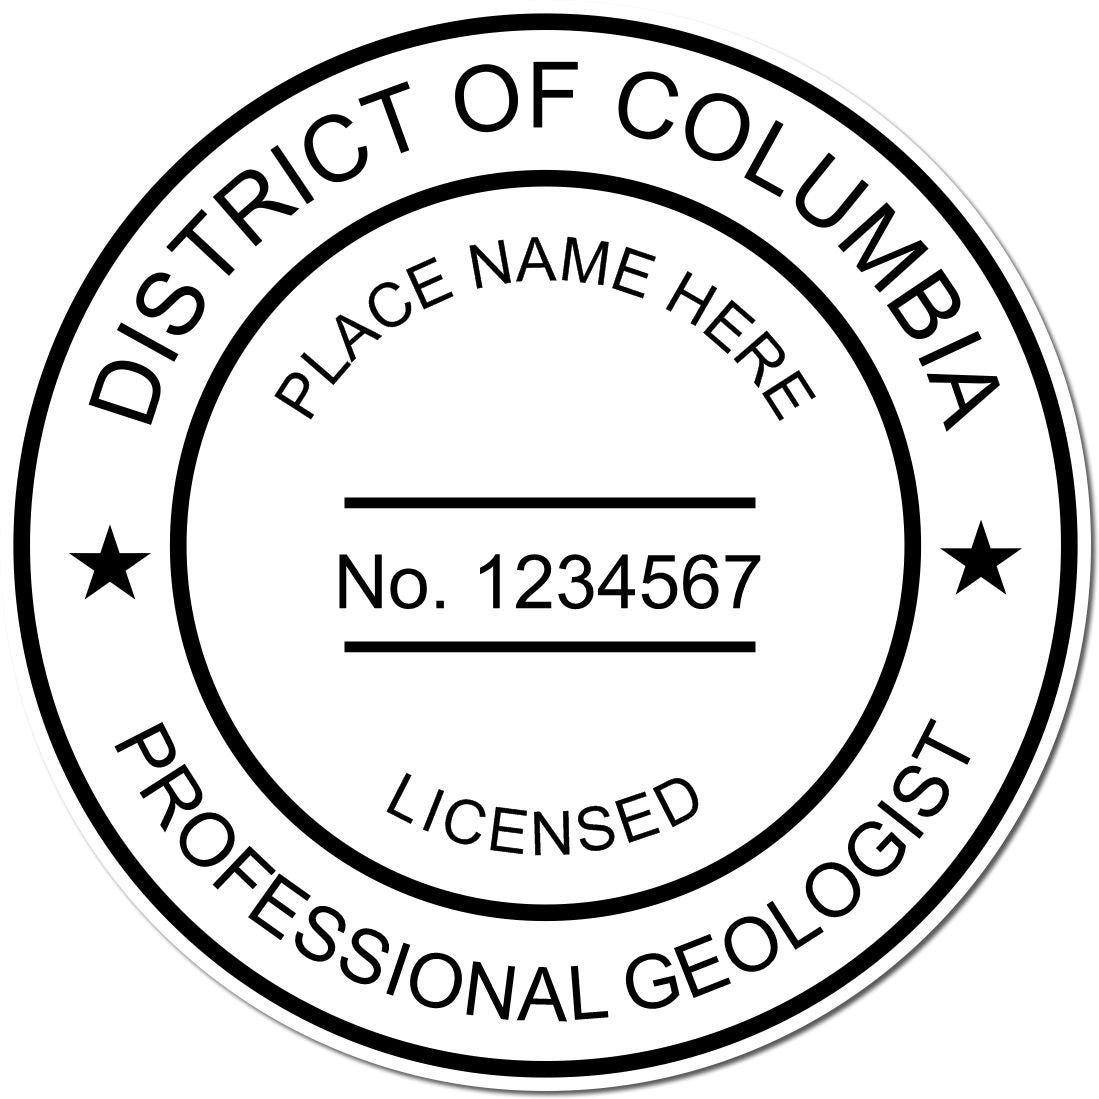 This paper is stamped with a sample imprint of the Digital District of Columbia Geologist Stamp, Electronic Seal for District of Columbia Geologist, signifying its quality and reliability.